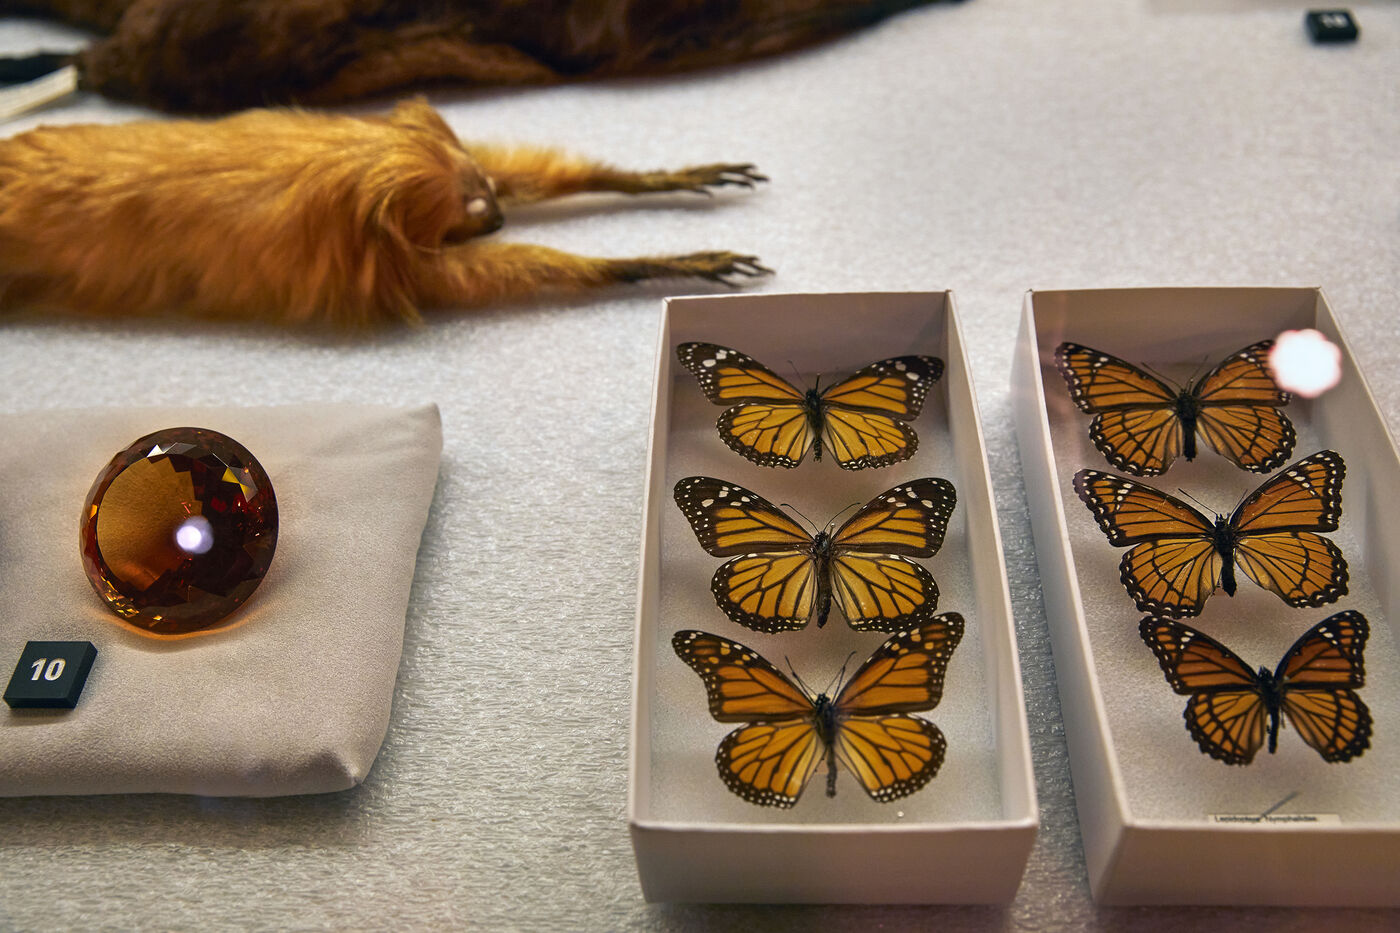 Different orange-colored specimens from a display case in the Wild Color exhibition, including butterflies, a round gem, and a primate.